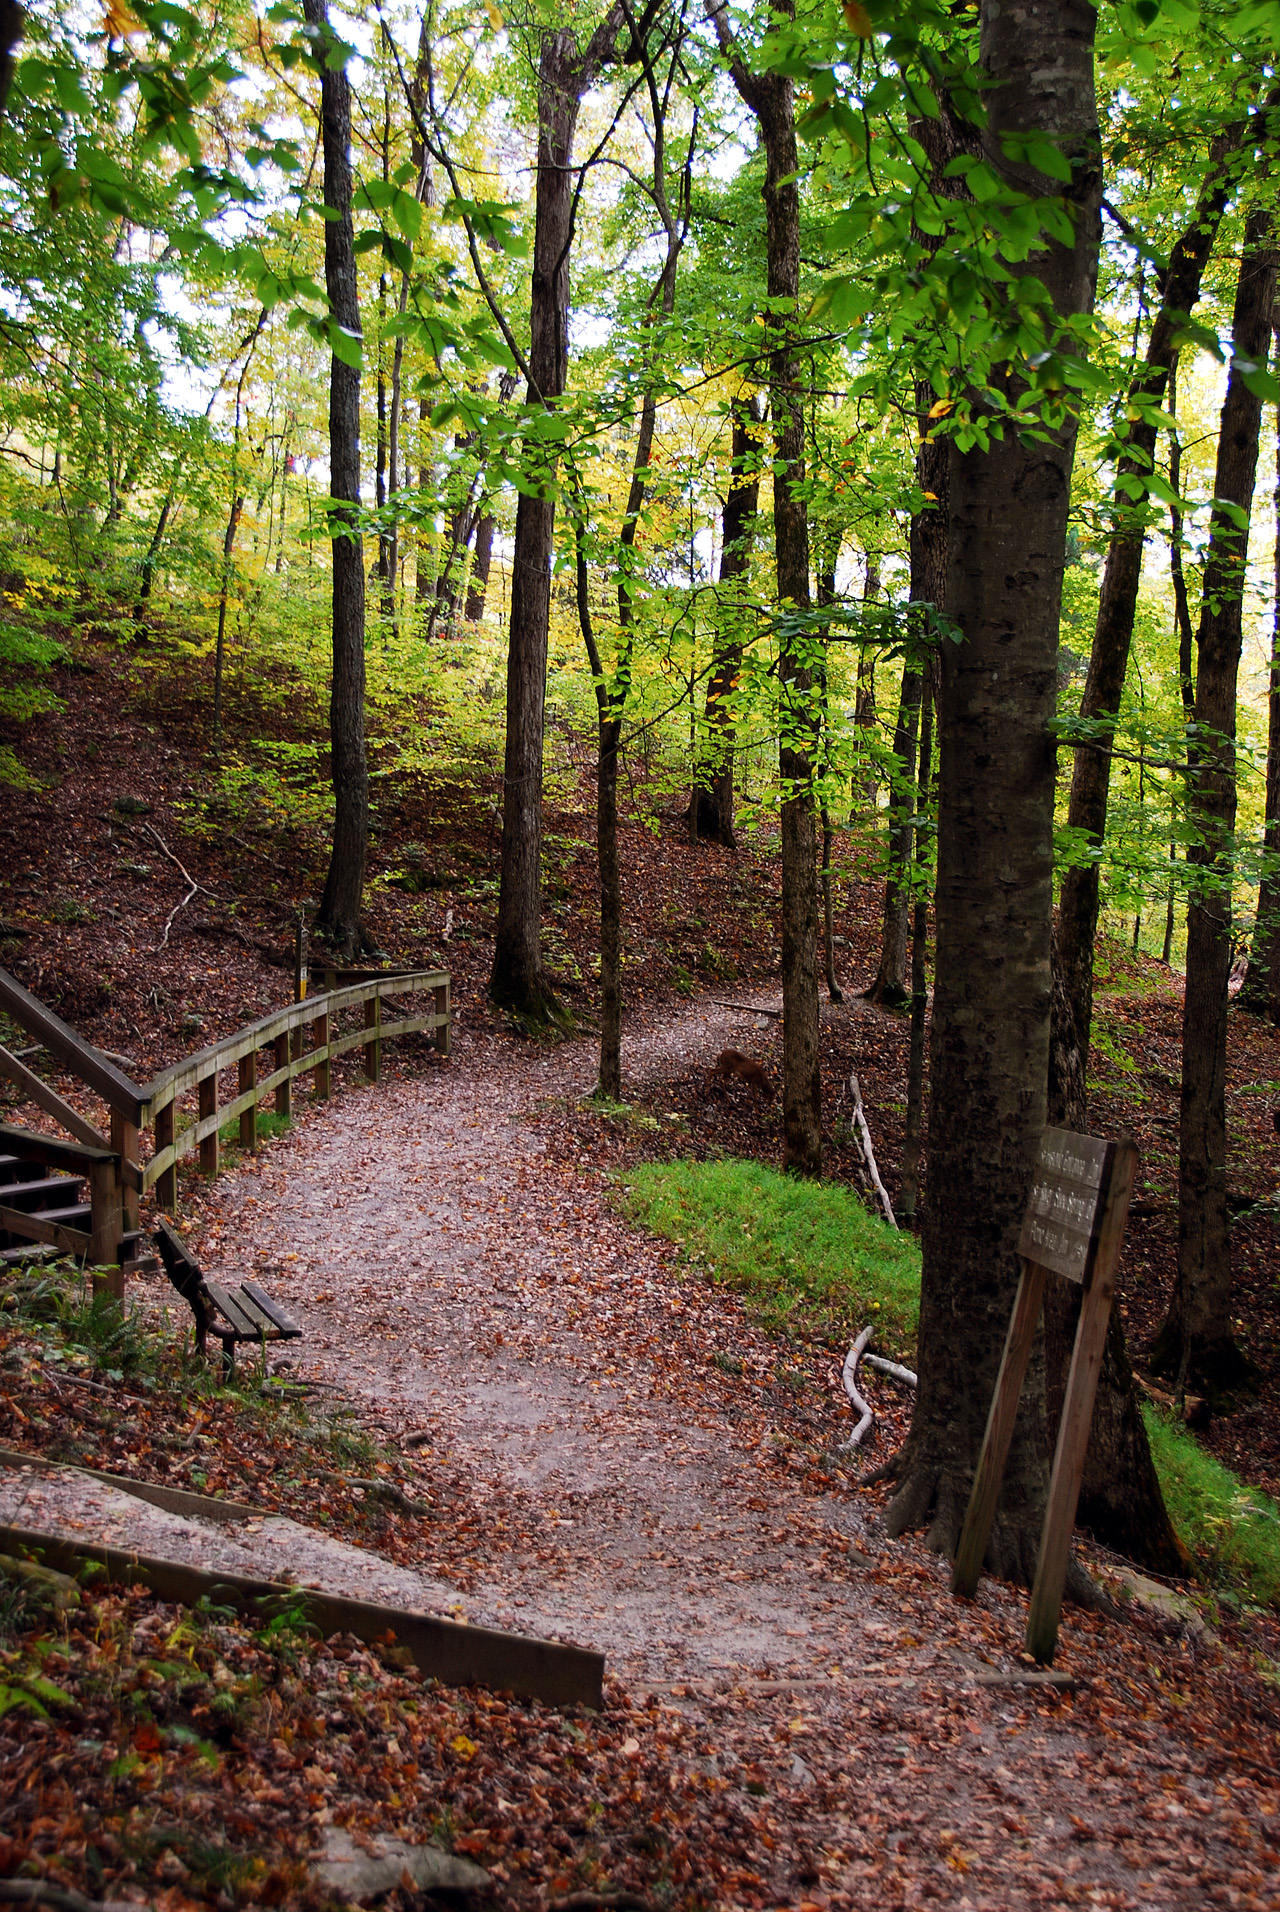 2012-10-12, 025, Mammoth Cave NP, KY